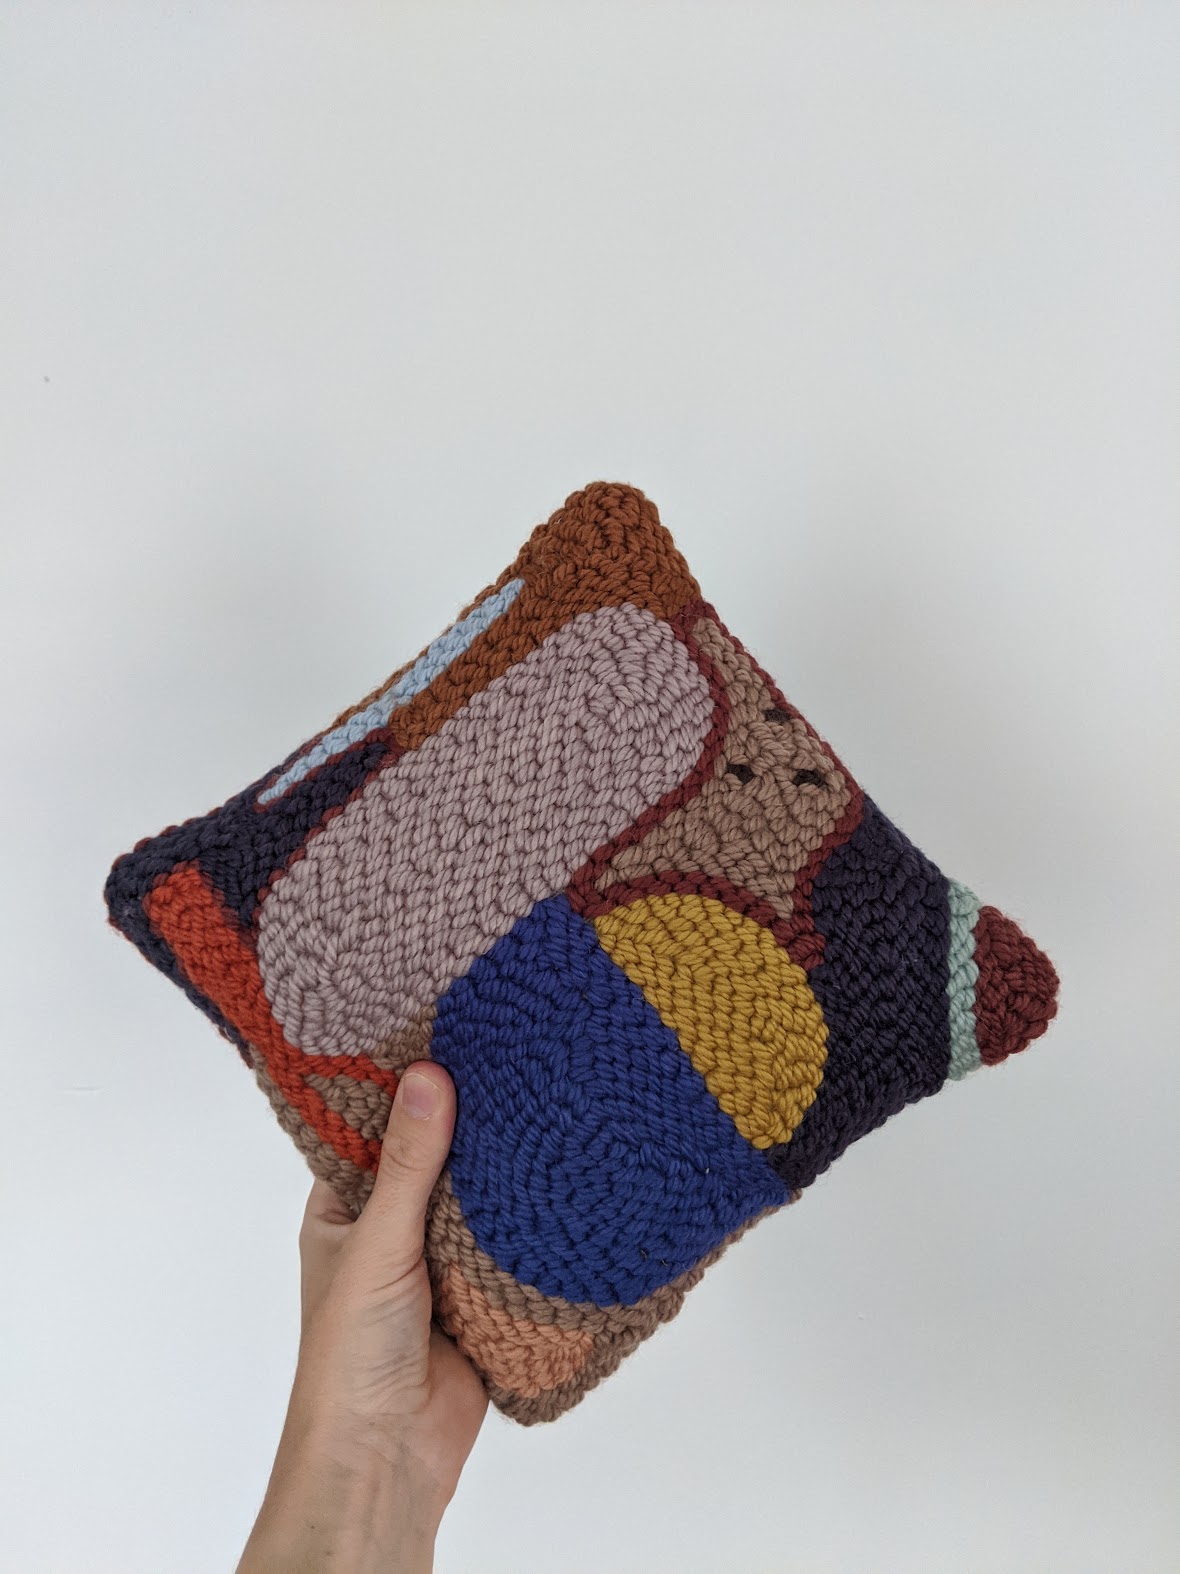 Modern Punch Needle Pillow Workshop with Local Artist Daisy McClellan